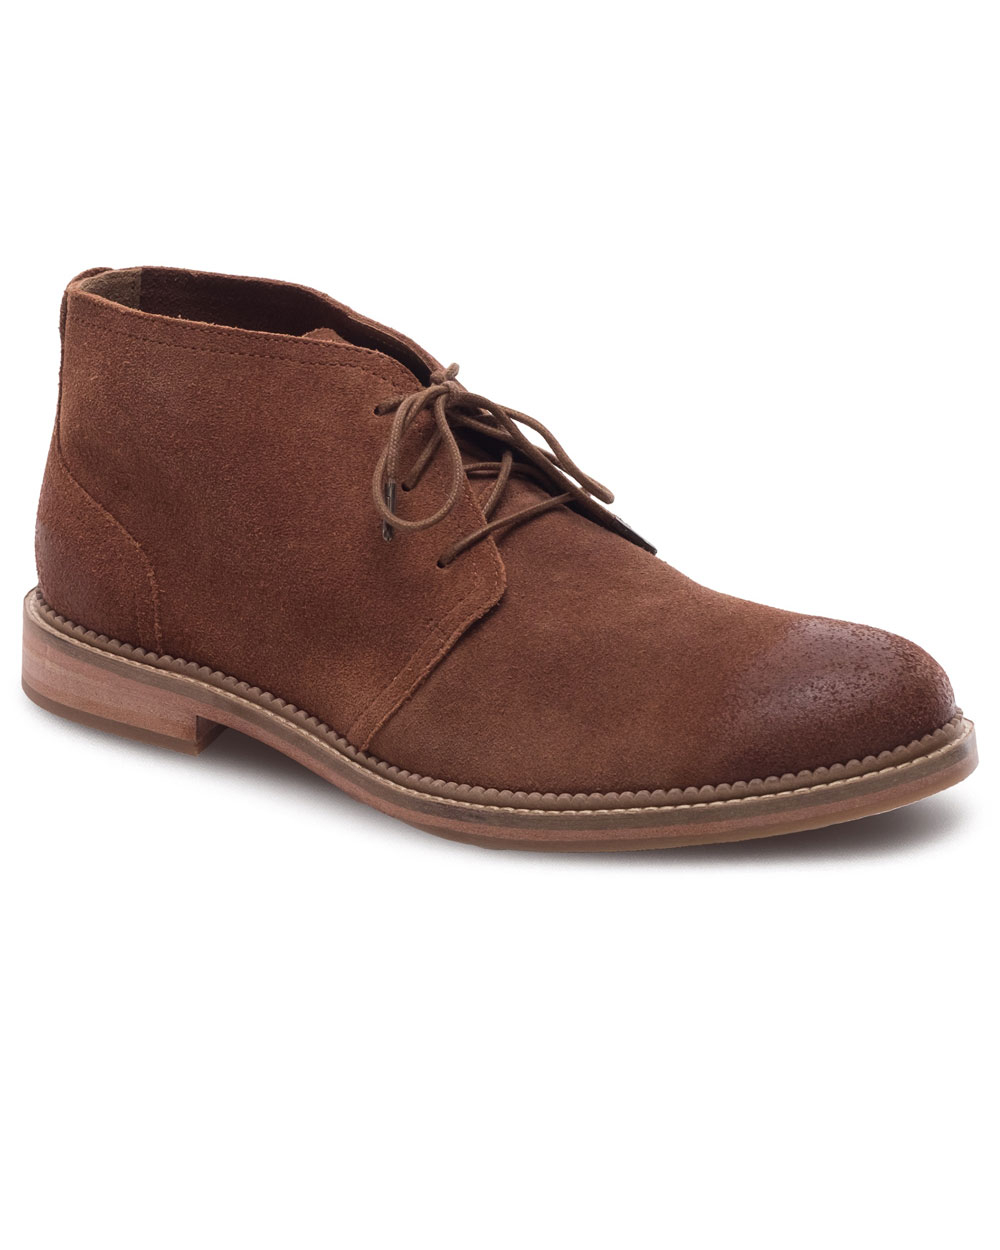 J Shoes Monarch Suede Leather Chukka (brandy)